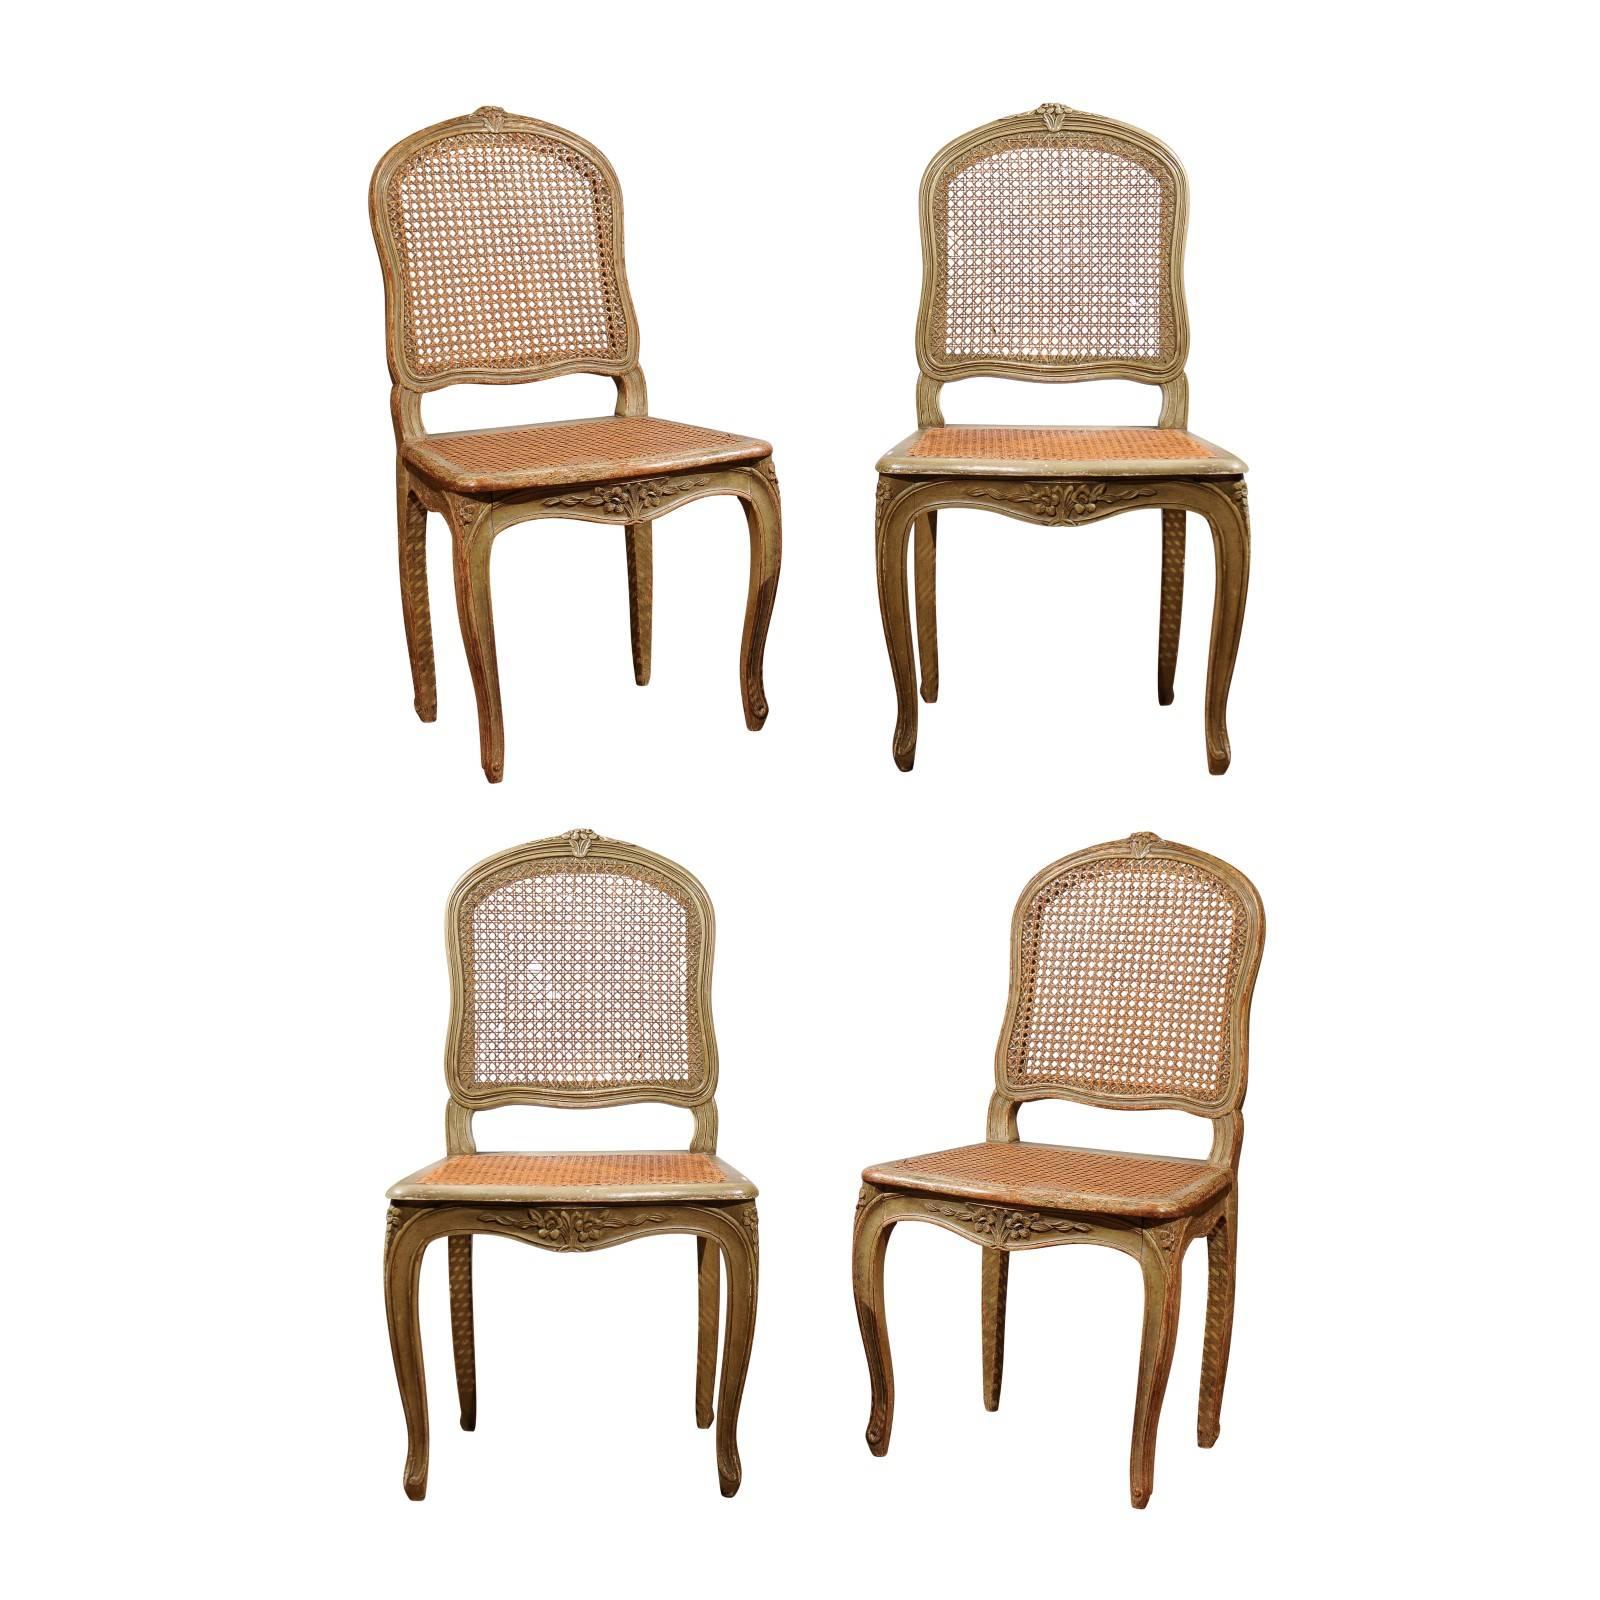 Set of Four French Louis XV Style Dining Room Chairs with Cane Upholstery, 1880s